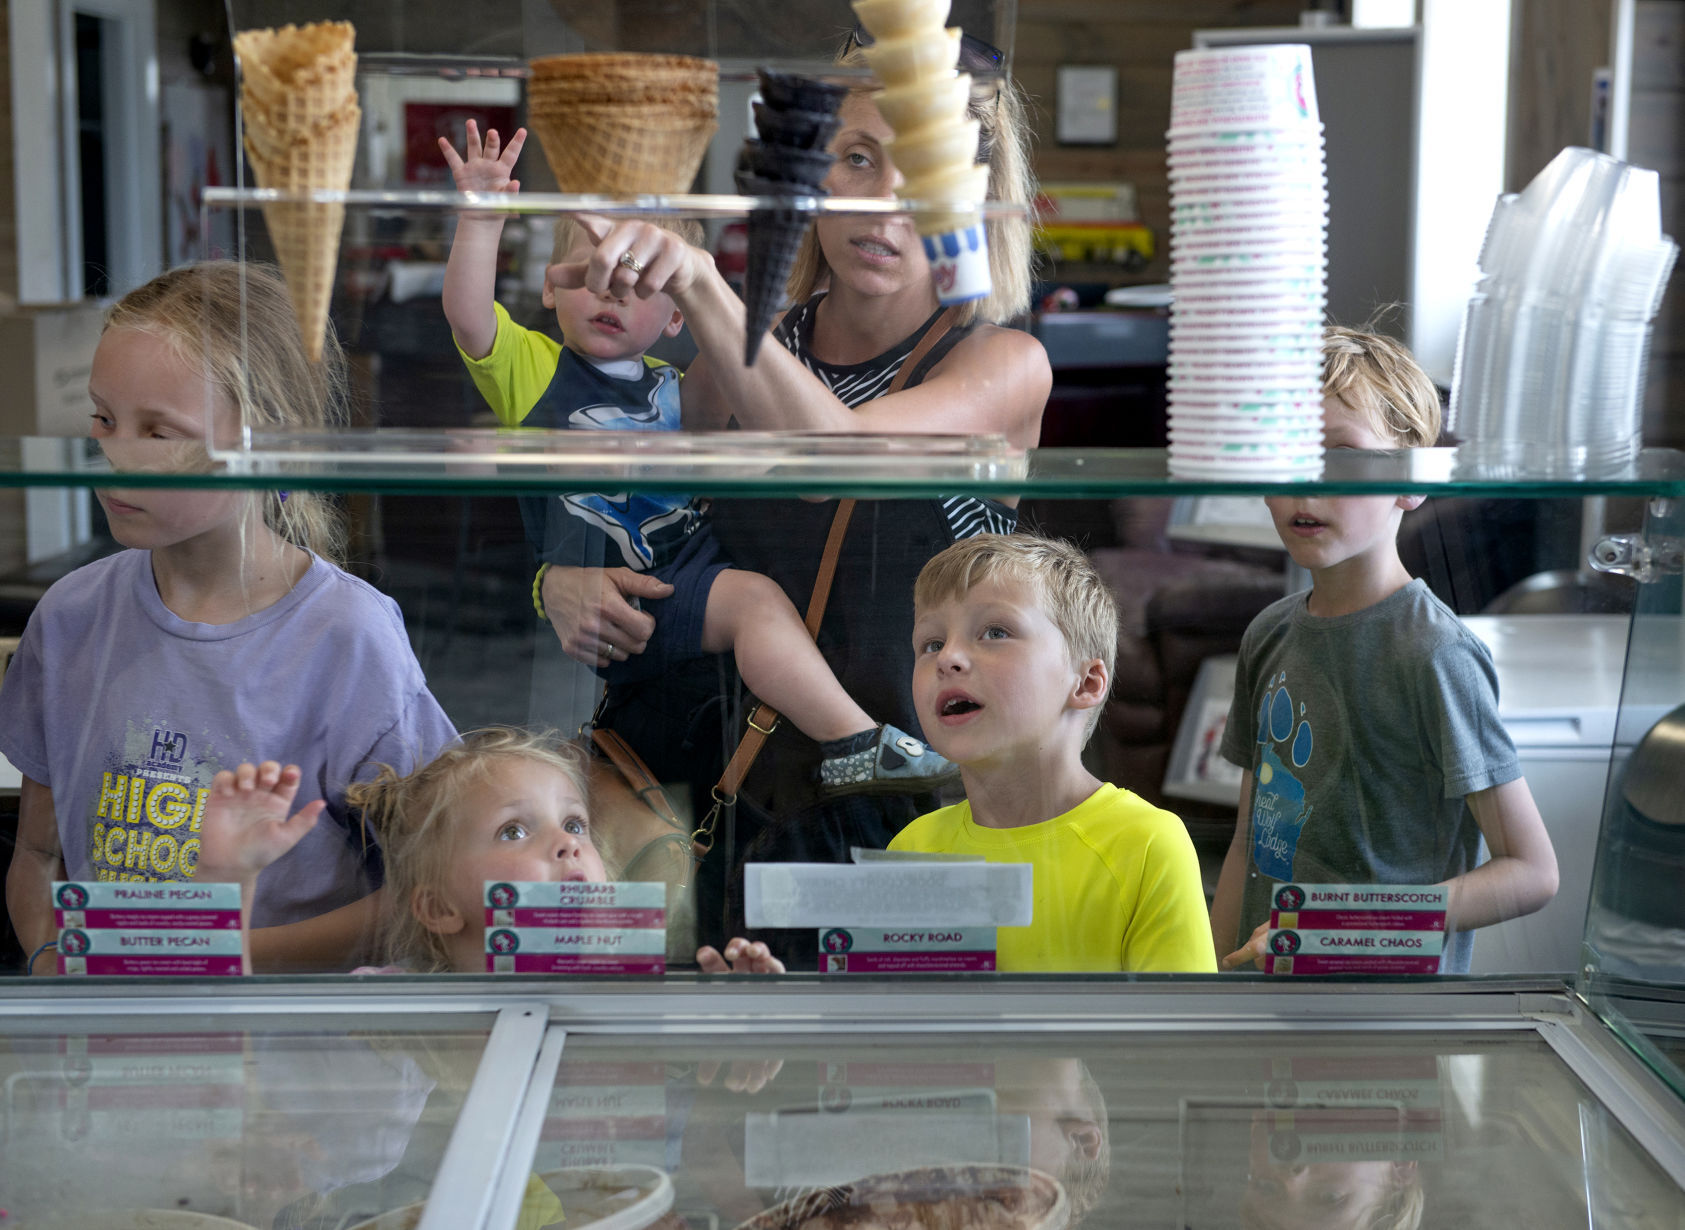 Members of the Rupp family (from left, Lily, Gracelyn, Oliver, Emmalee, Miles and Sawyer) look over the choices of ice cream and cones at Delaney’s Ice Cream Shoppe in Farley, Iowa.    PHOTO CREDIT: Dave LaBelle